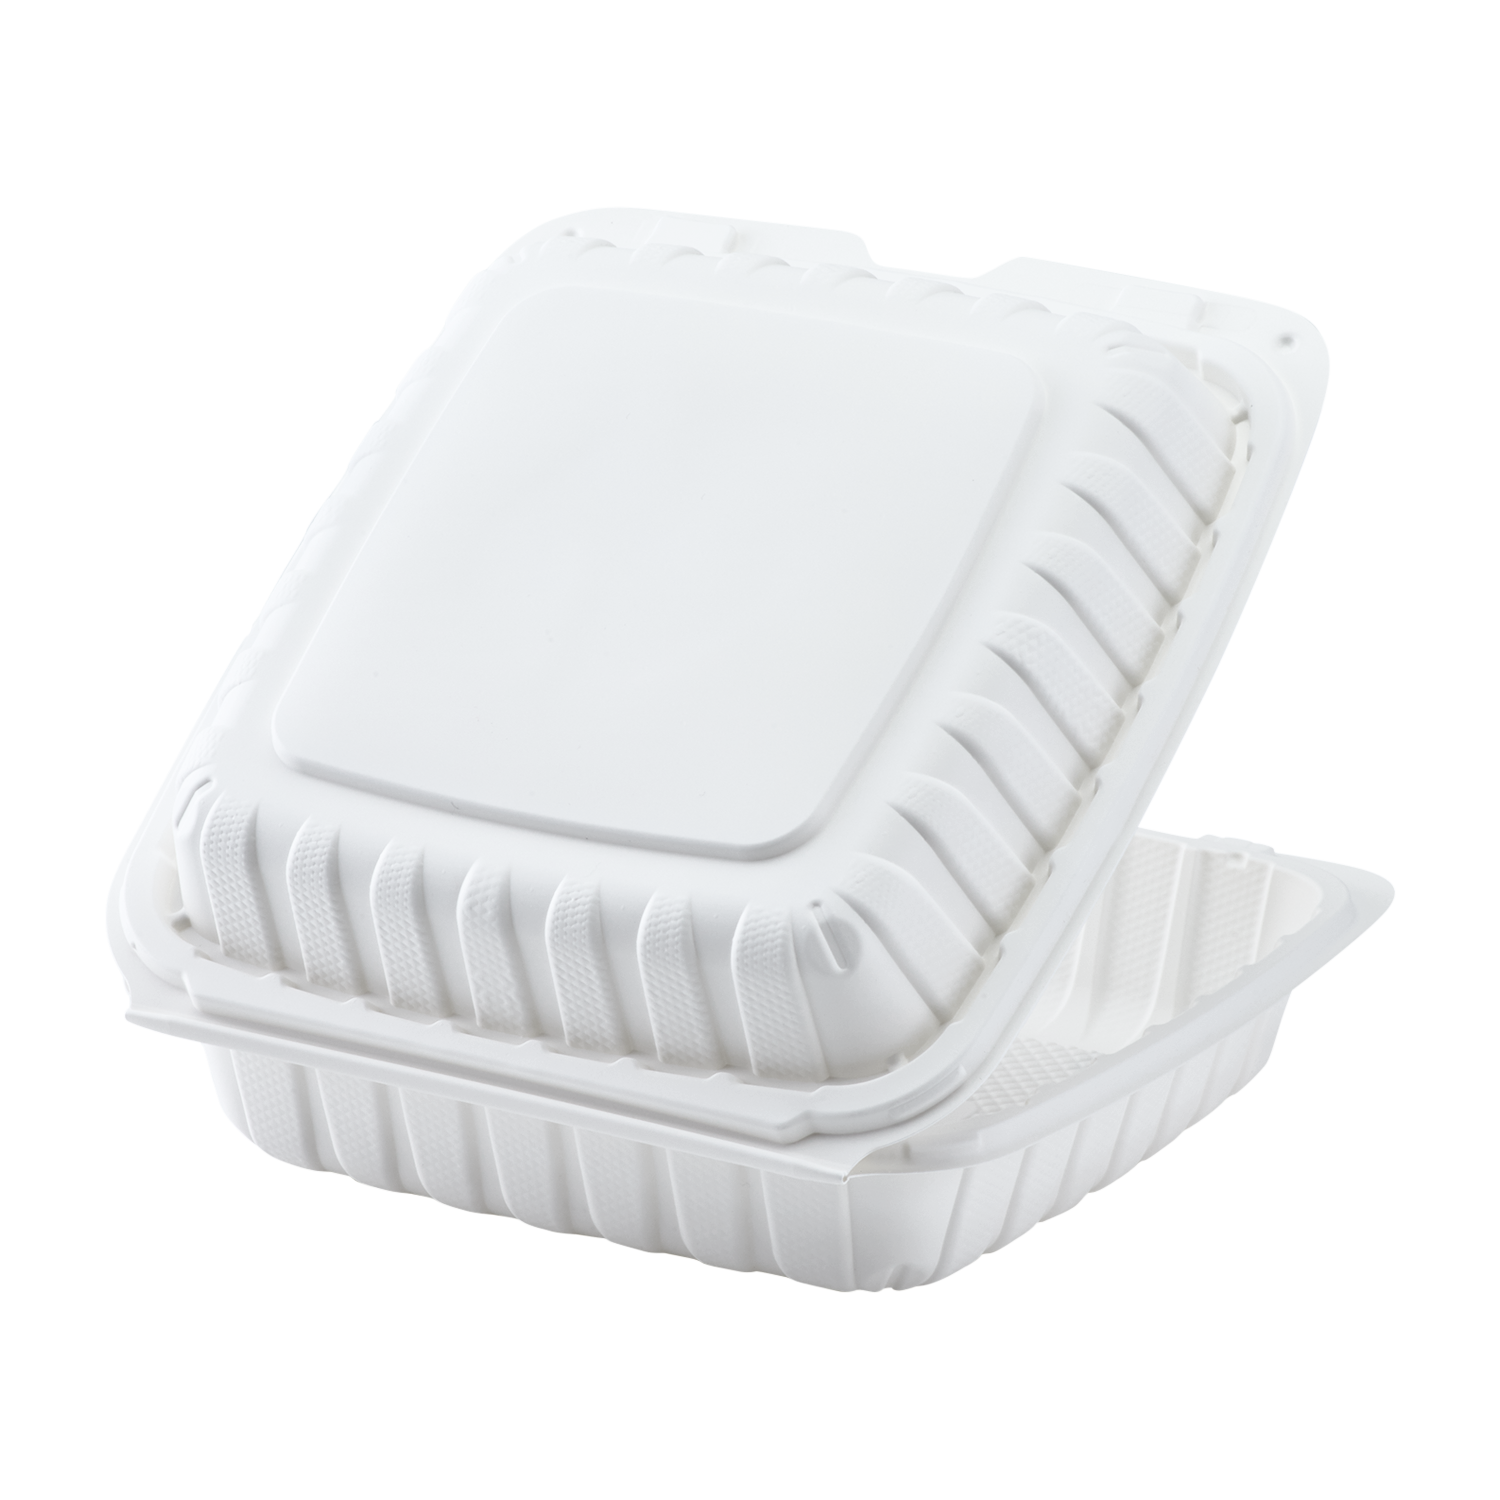 GET EC-12-1-JA-EC 3-Compartment Take-Out Food Container, 9 x 9, Jade (Set  of 4)